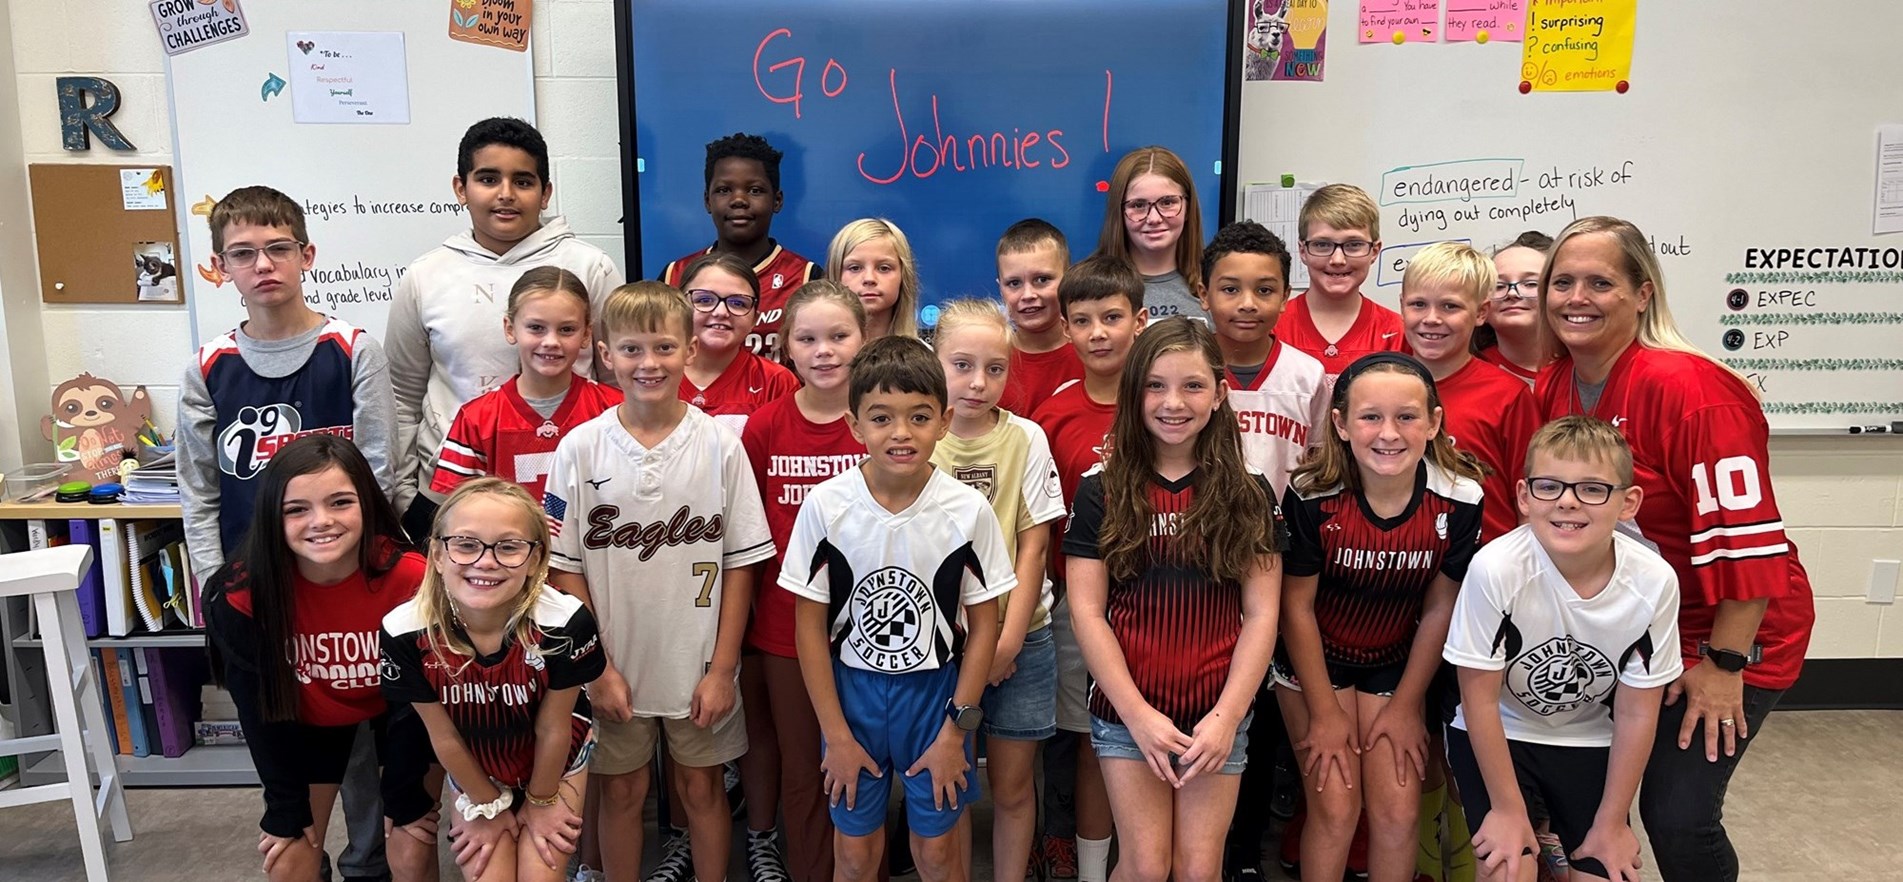 Students and teacher gather for photo wearing sports jerseys for Spirit Week.